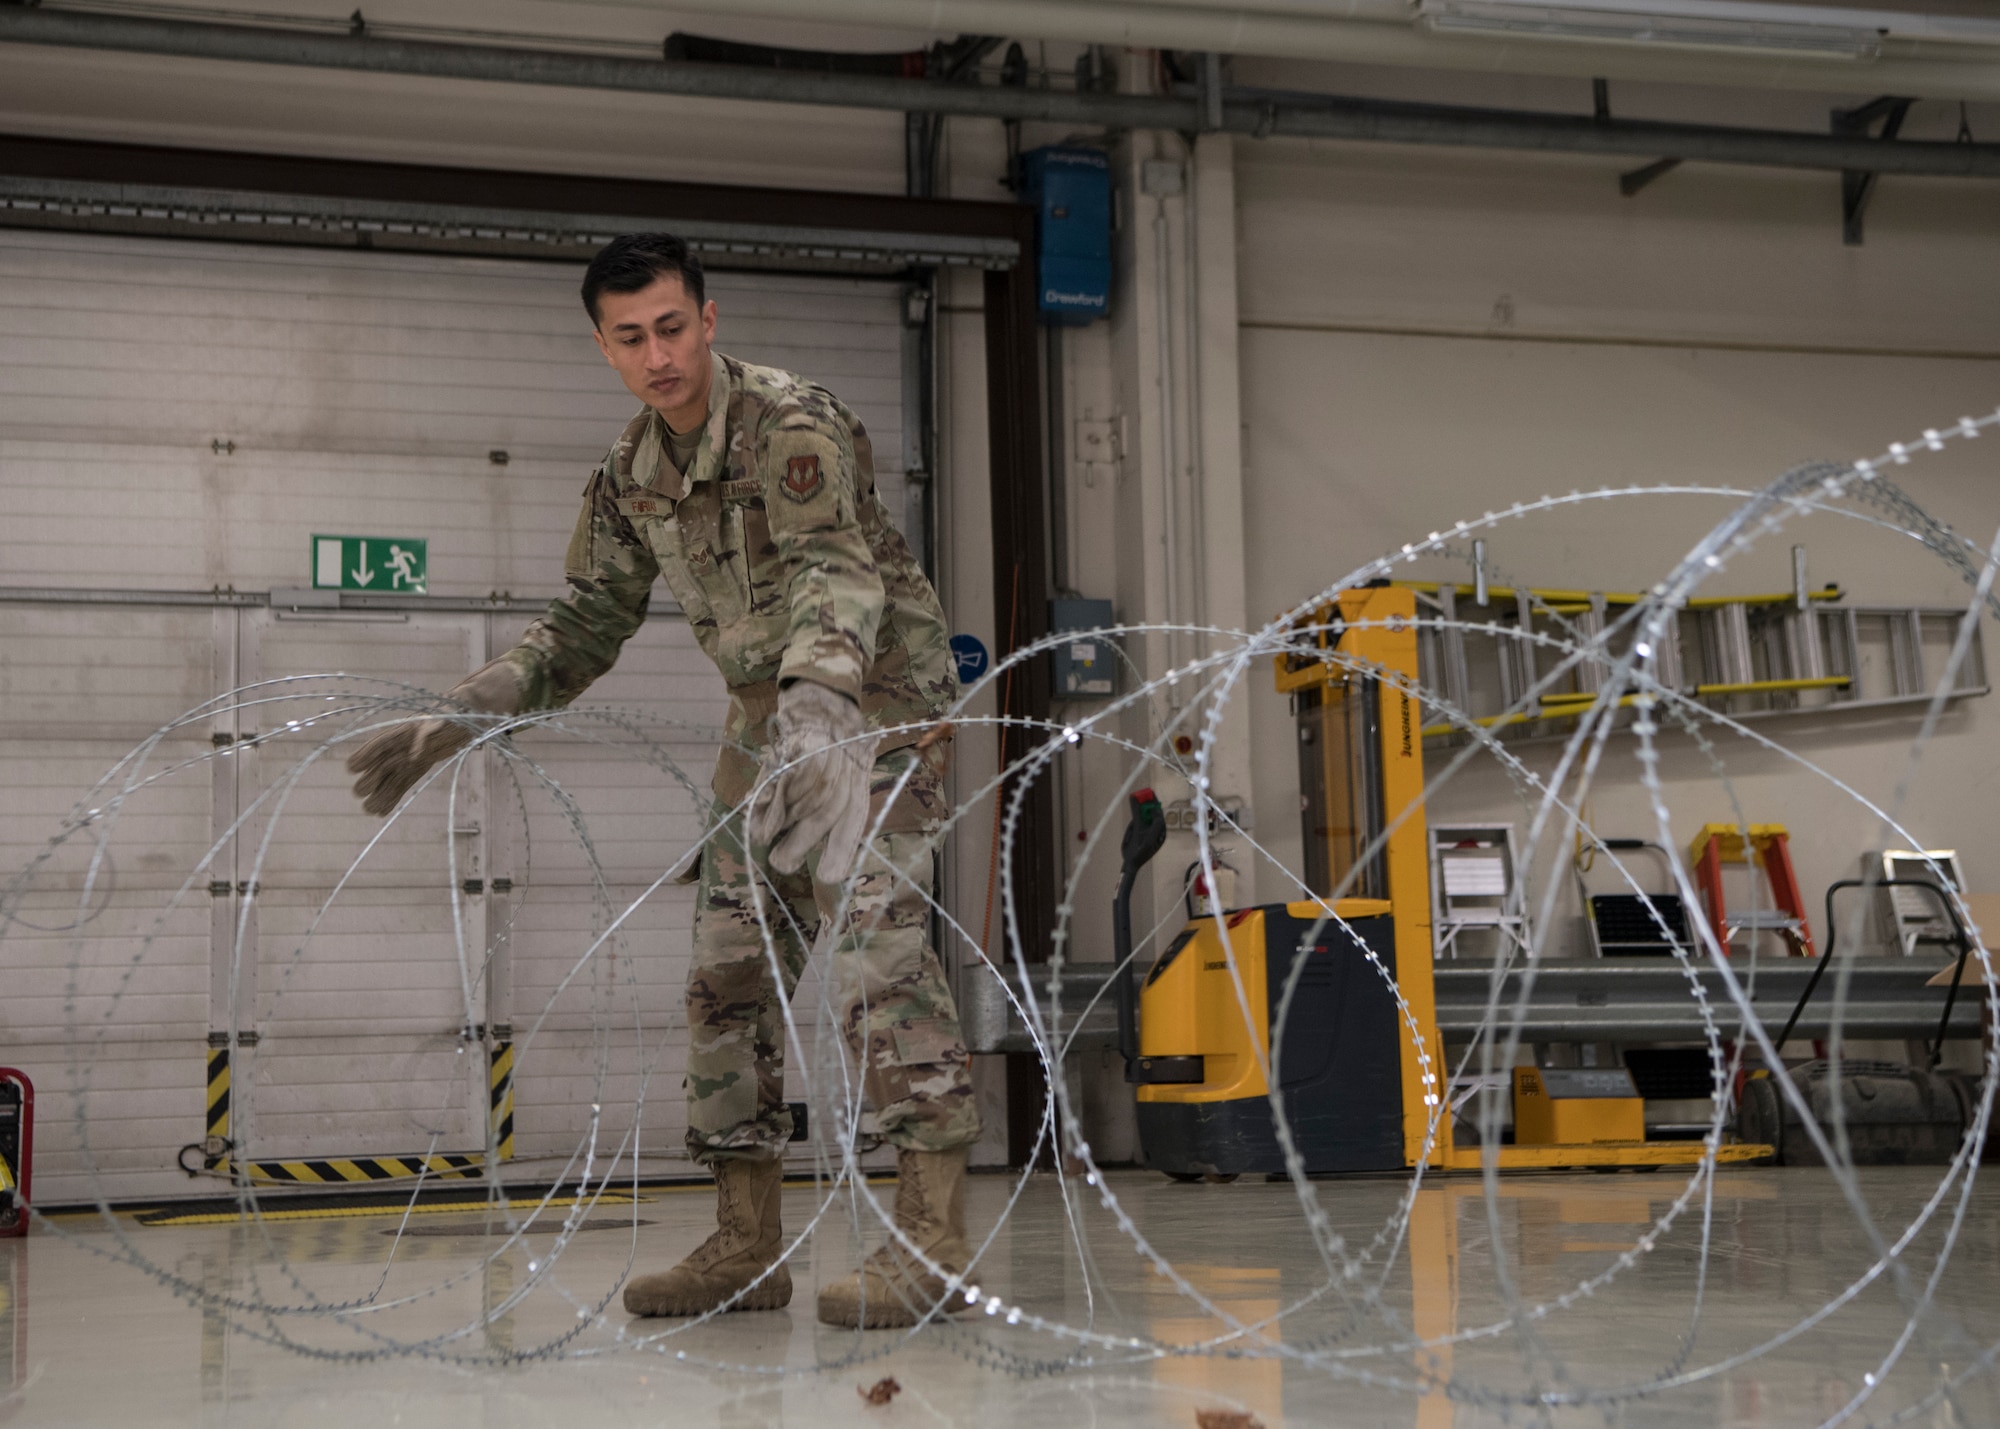 U.S. Air Force Staff Sgt. Abraham Farias, 786th Civil Engineer Squadron expeditionary engineering training manager, uncurls a roll of barbed tape at Ramstein Air Base, Germany, April 23, 2020